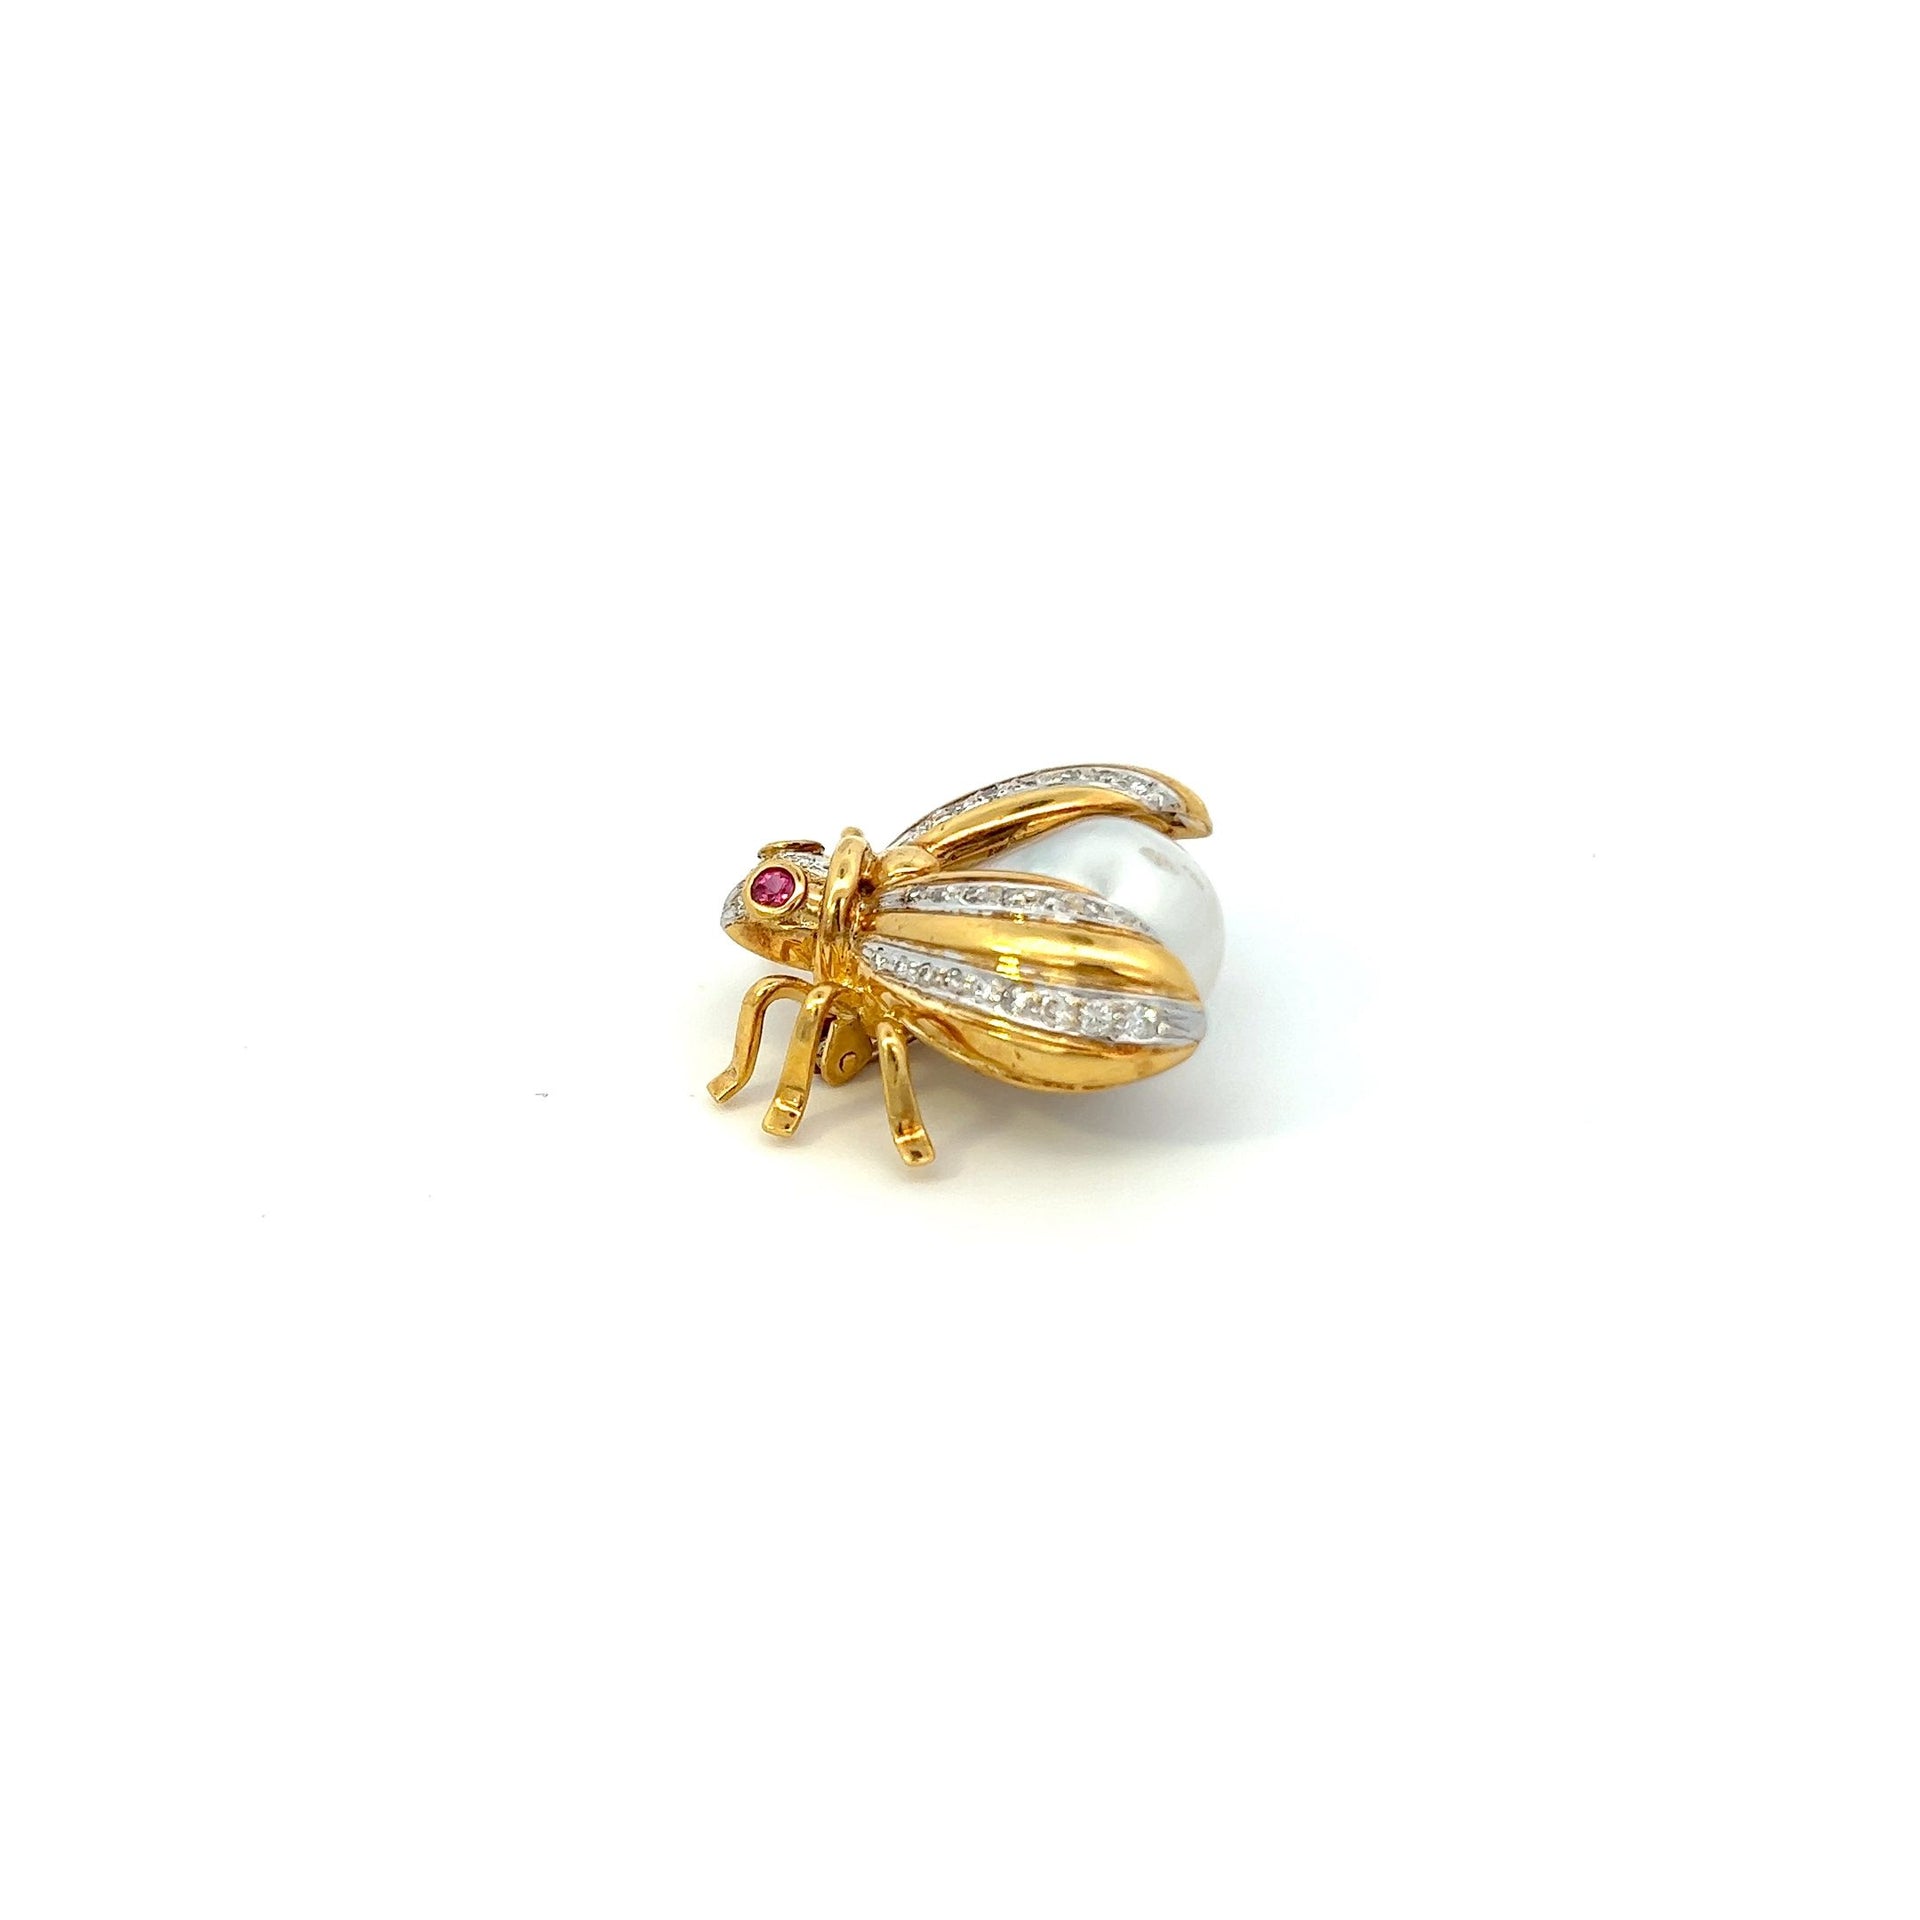 Estate Retro Period 18KT Yellow Gold Pearl and Diamond Fly Lapel Pin